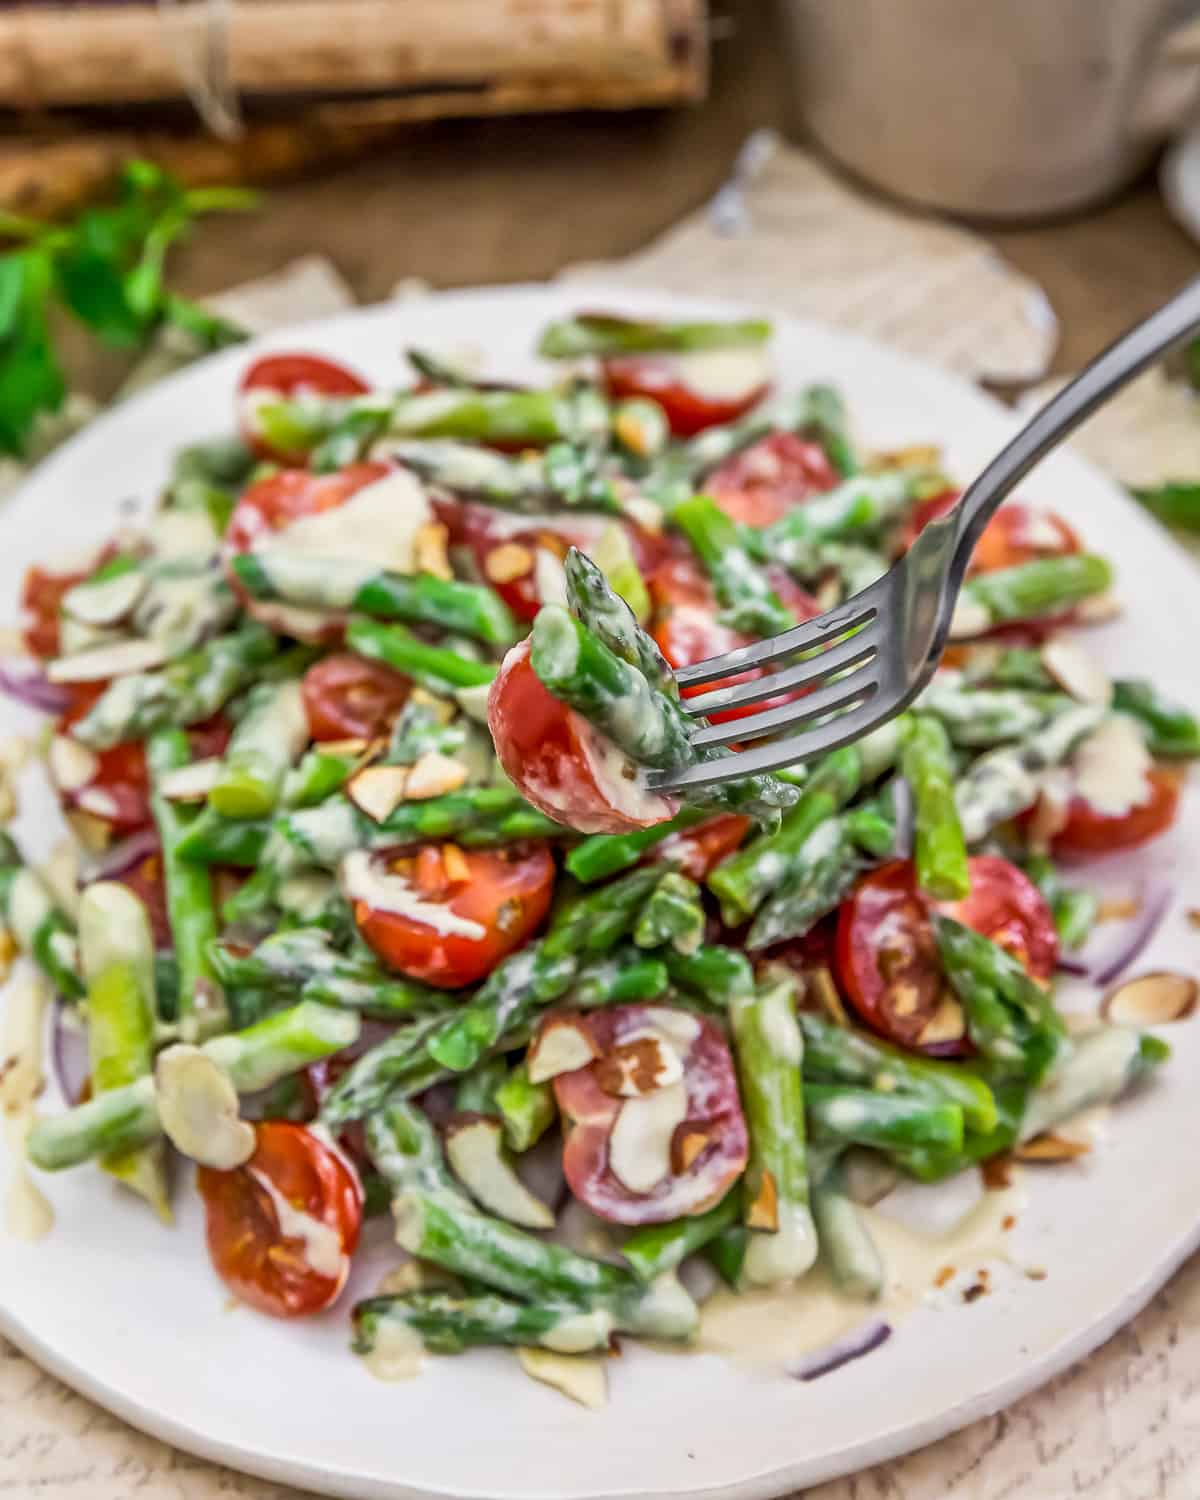 Forkful of Asparagus Tomato Salad with Dijon Dressing